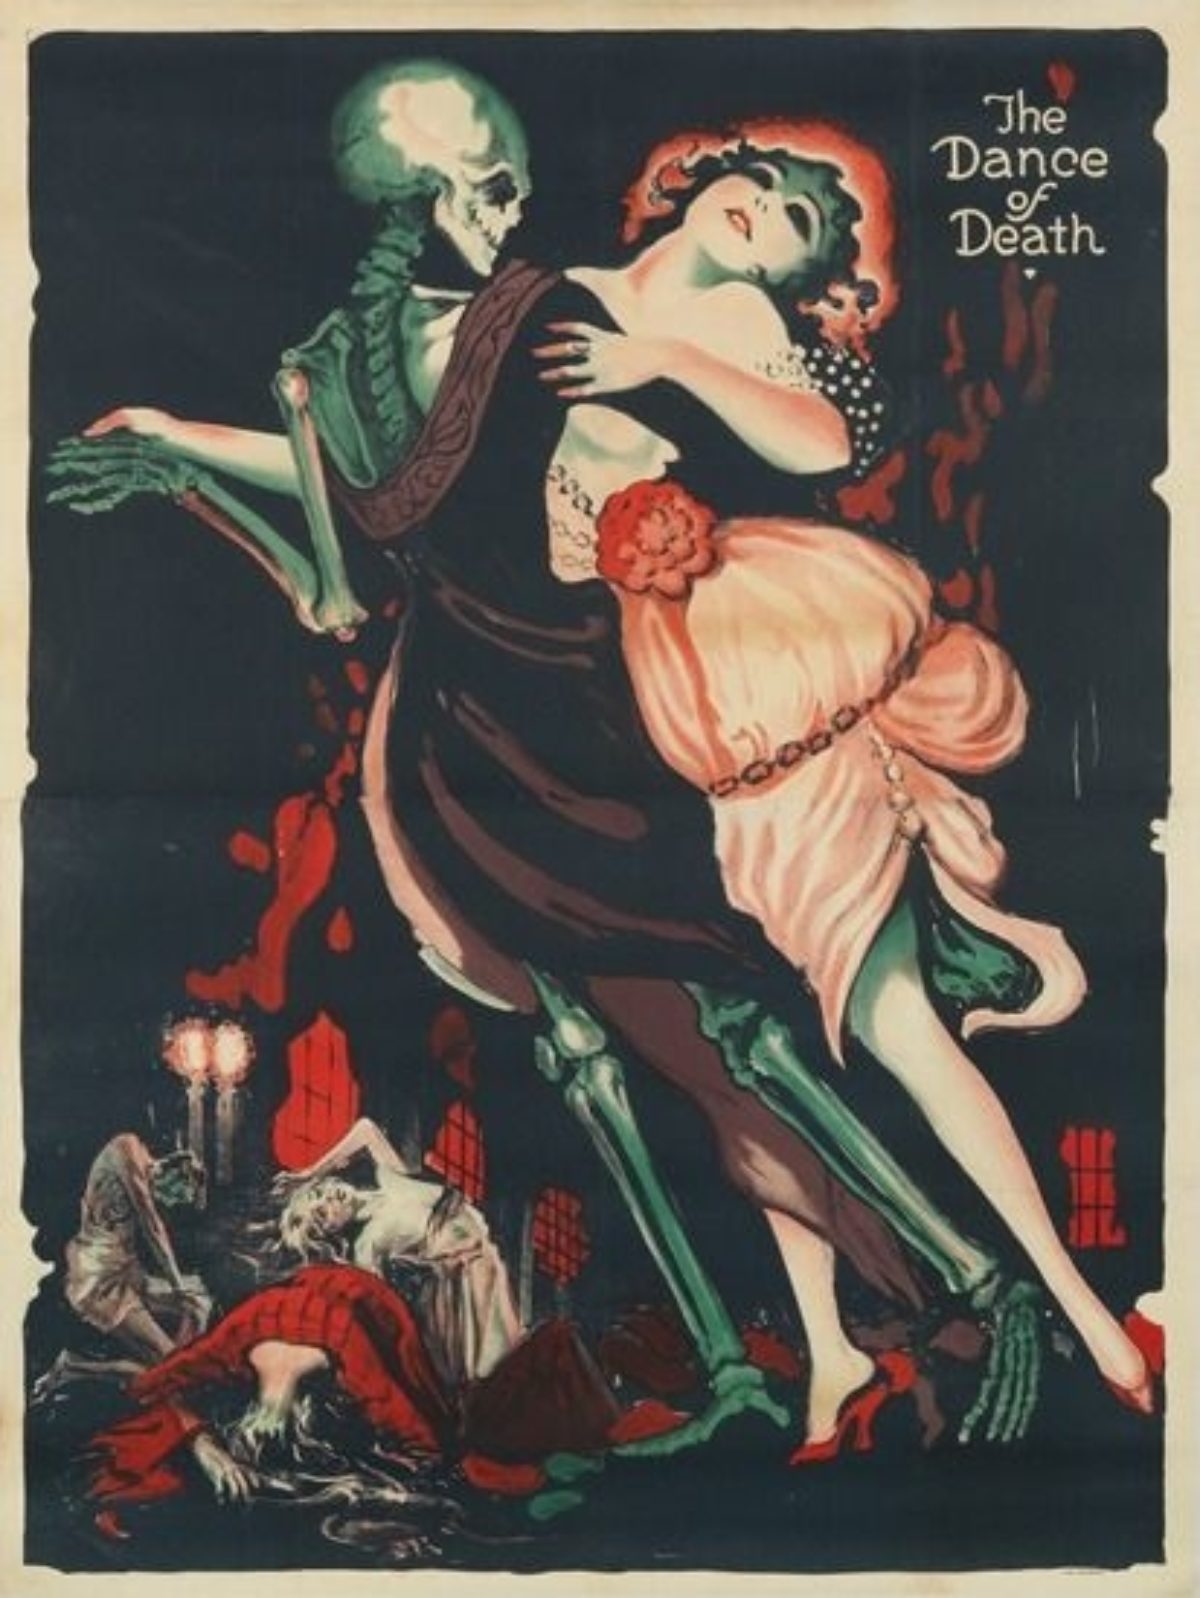 A poster of a skeleton in a toga dancing with a woman in a dress and fainting people on the floor.